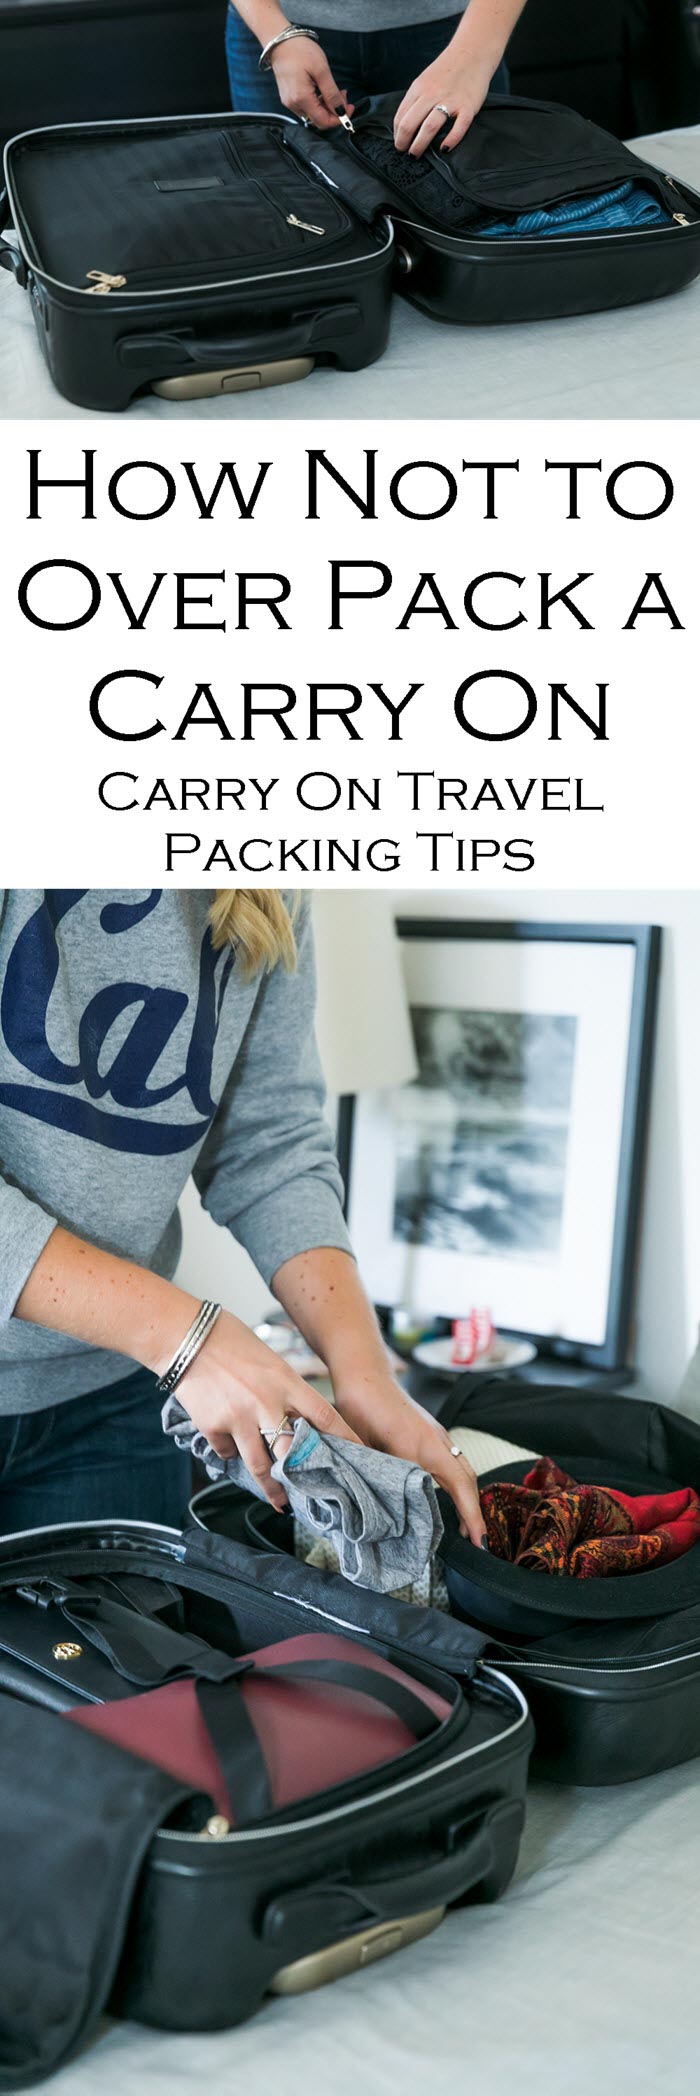 Carry On Travel Packing Tips - How Not to Over Pack a Carry On #travel #traveltips #carryon #luggage #packing #travelblogger #weekendtrip